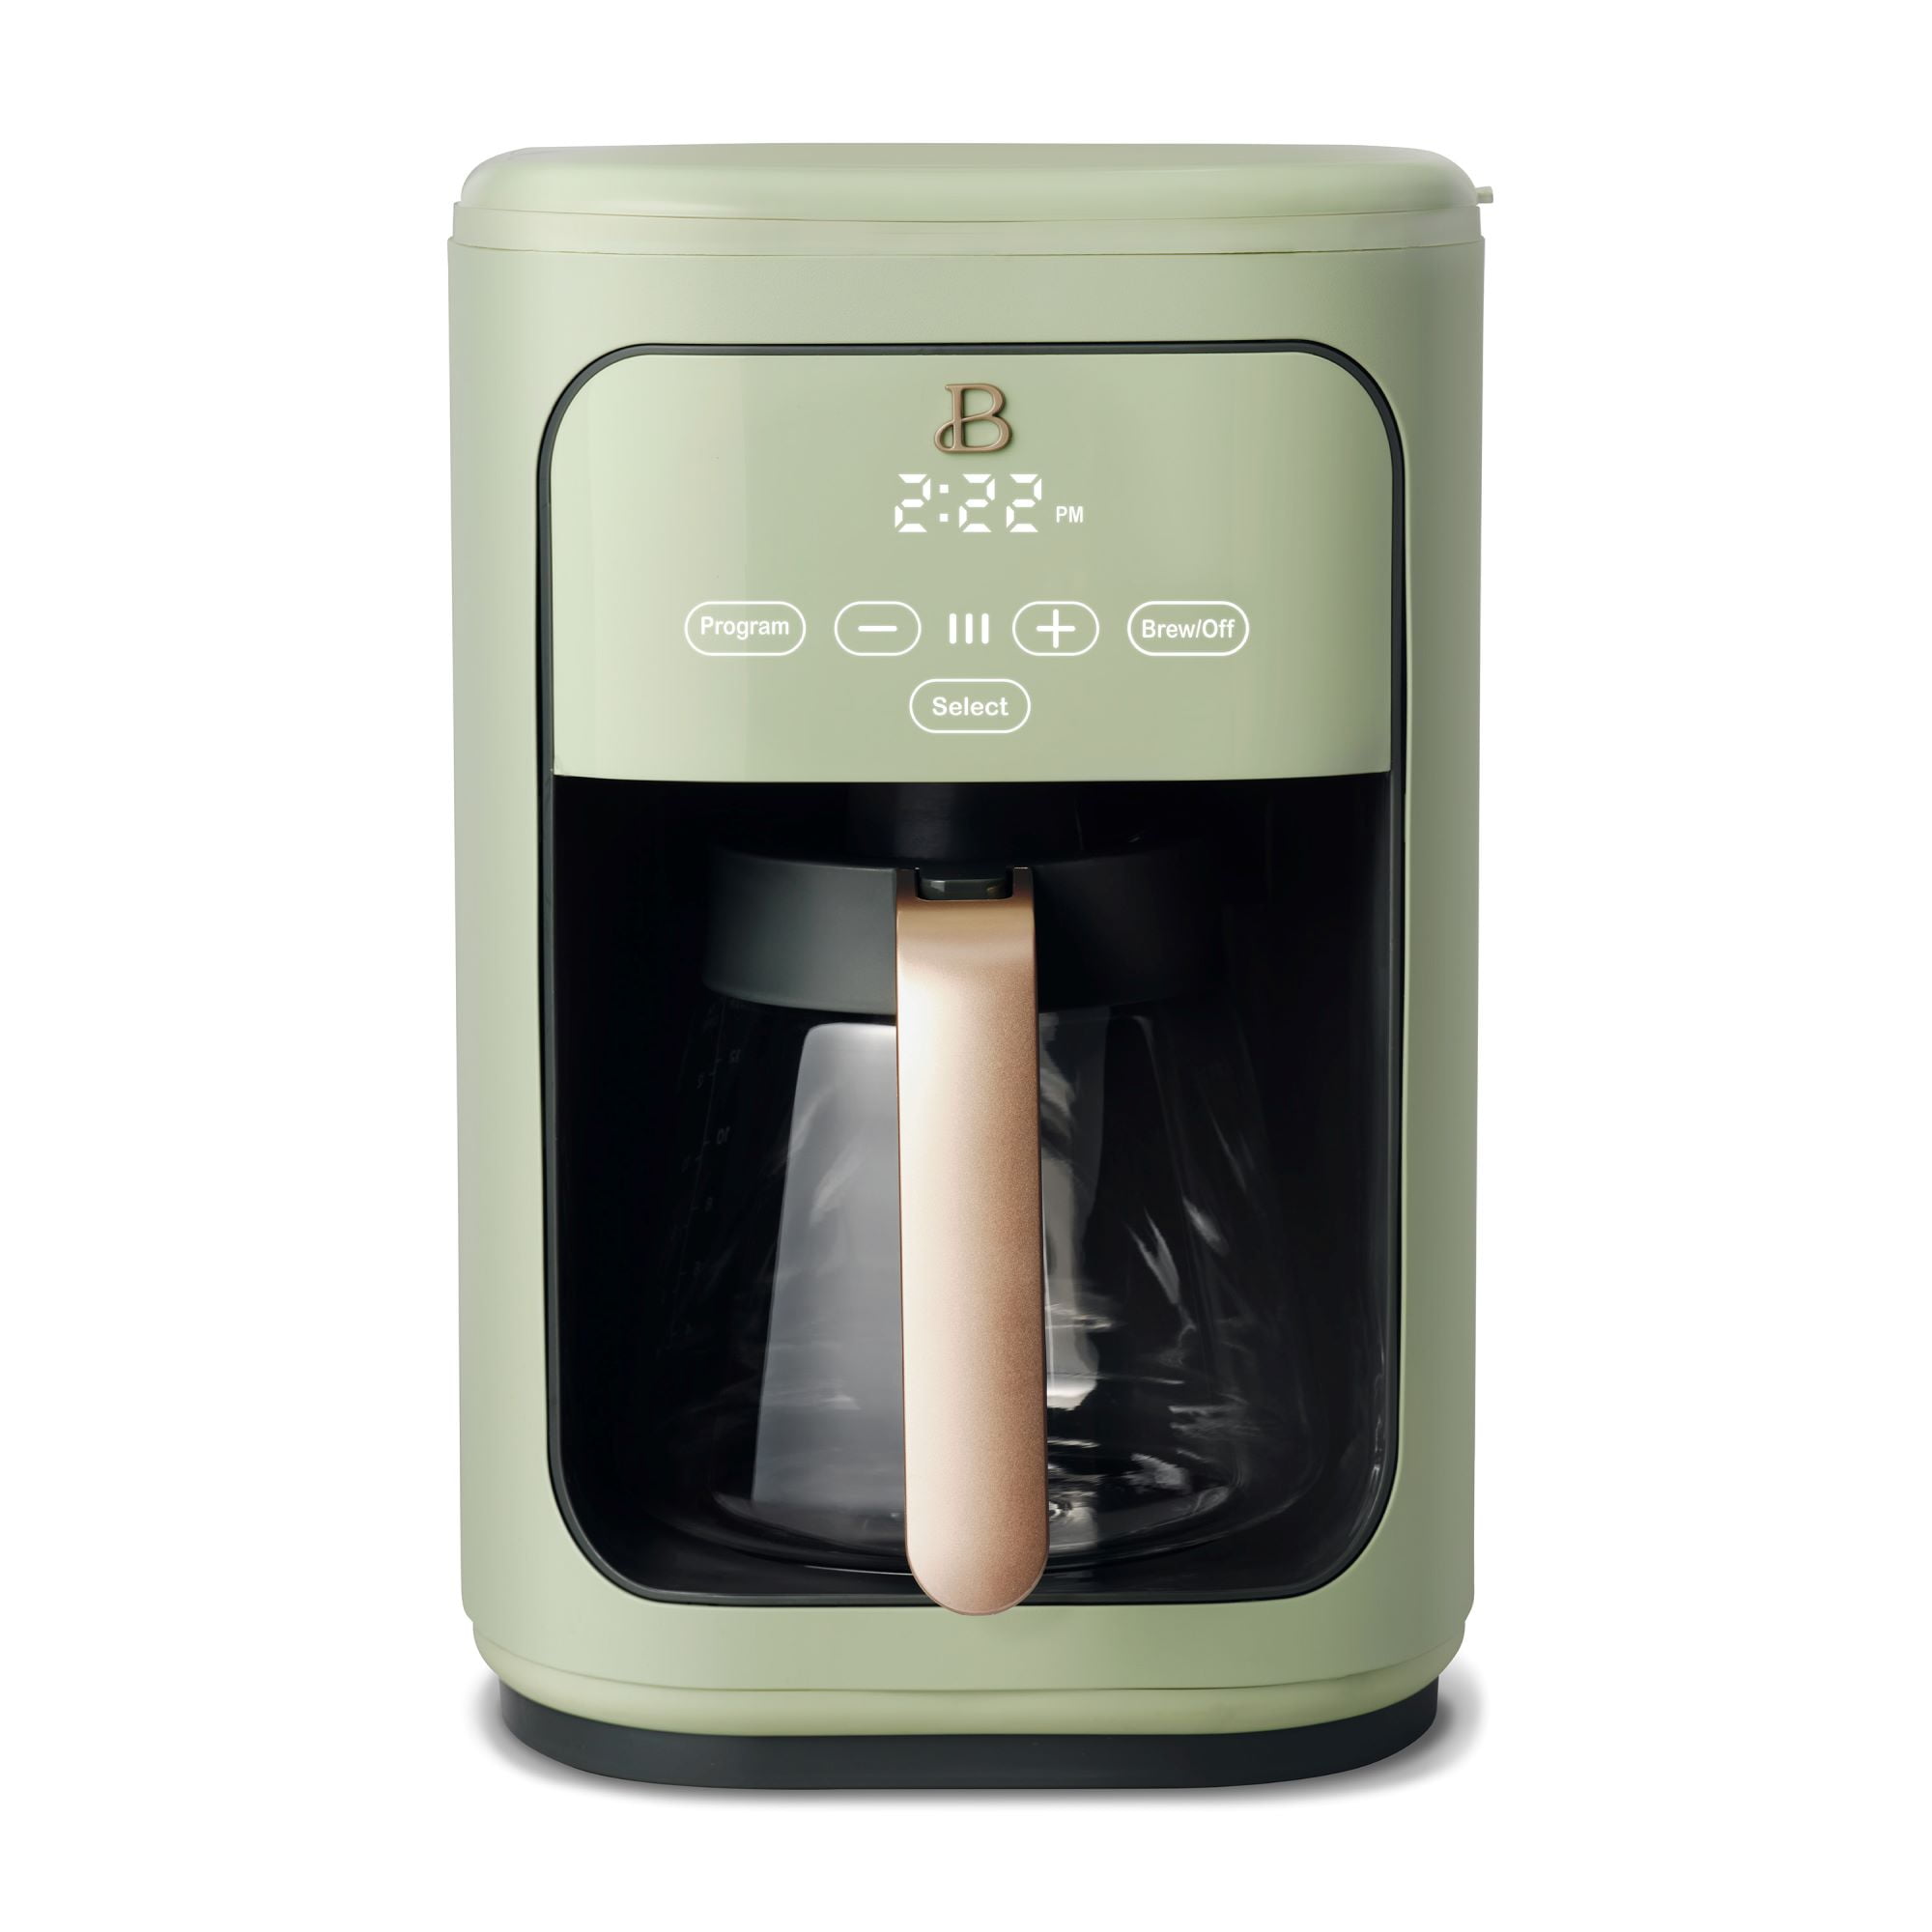 TKM Home 14 Cup Programmable Touchscreen Coffee Maker, Sage Green By Drew Barrymore